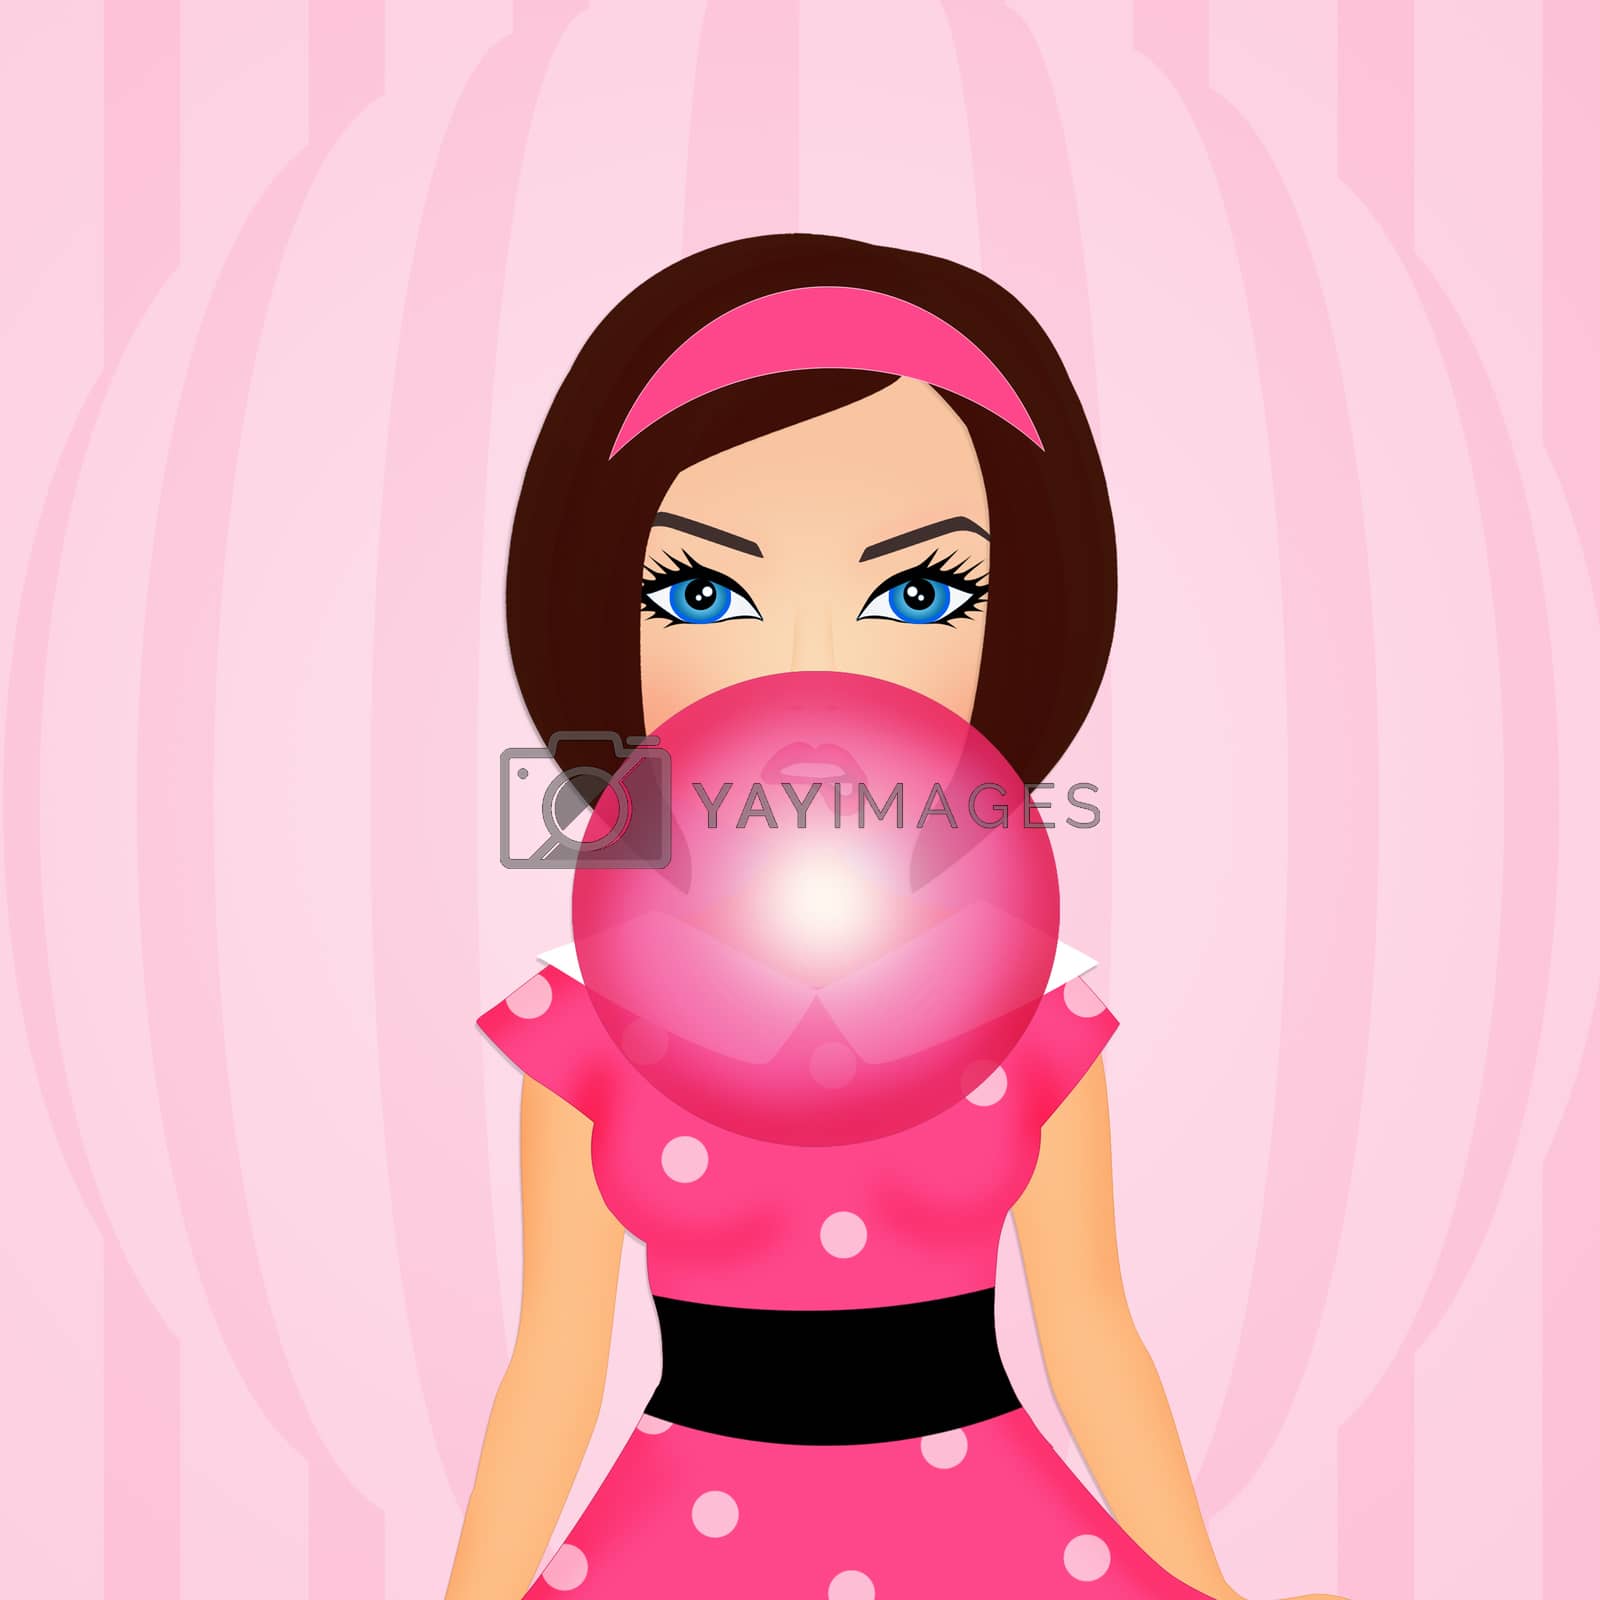 Royalty free image of girl with bubble gum by adrenalina